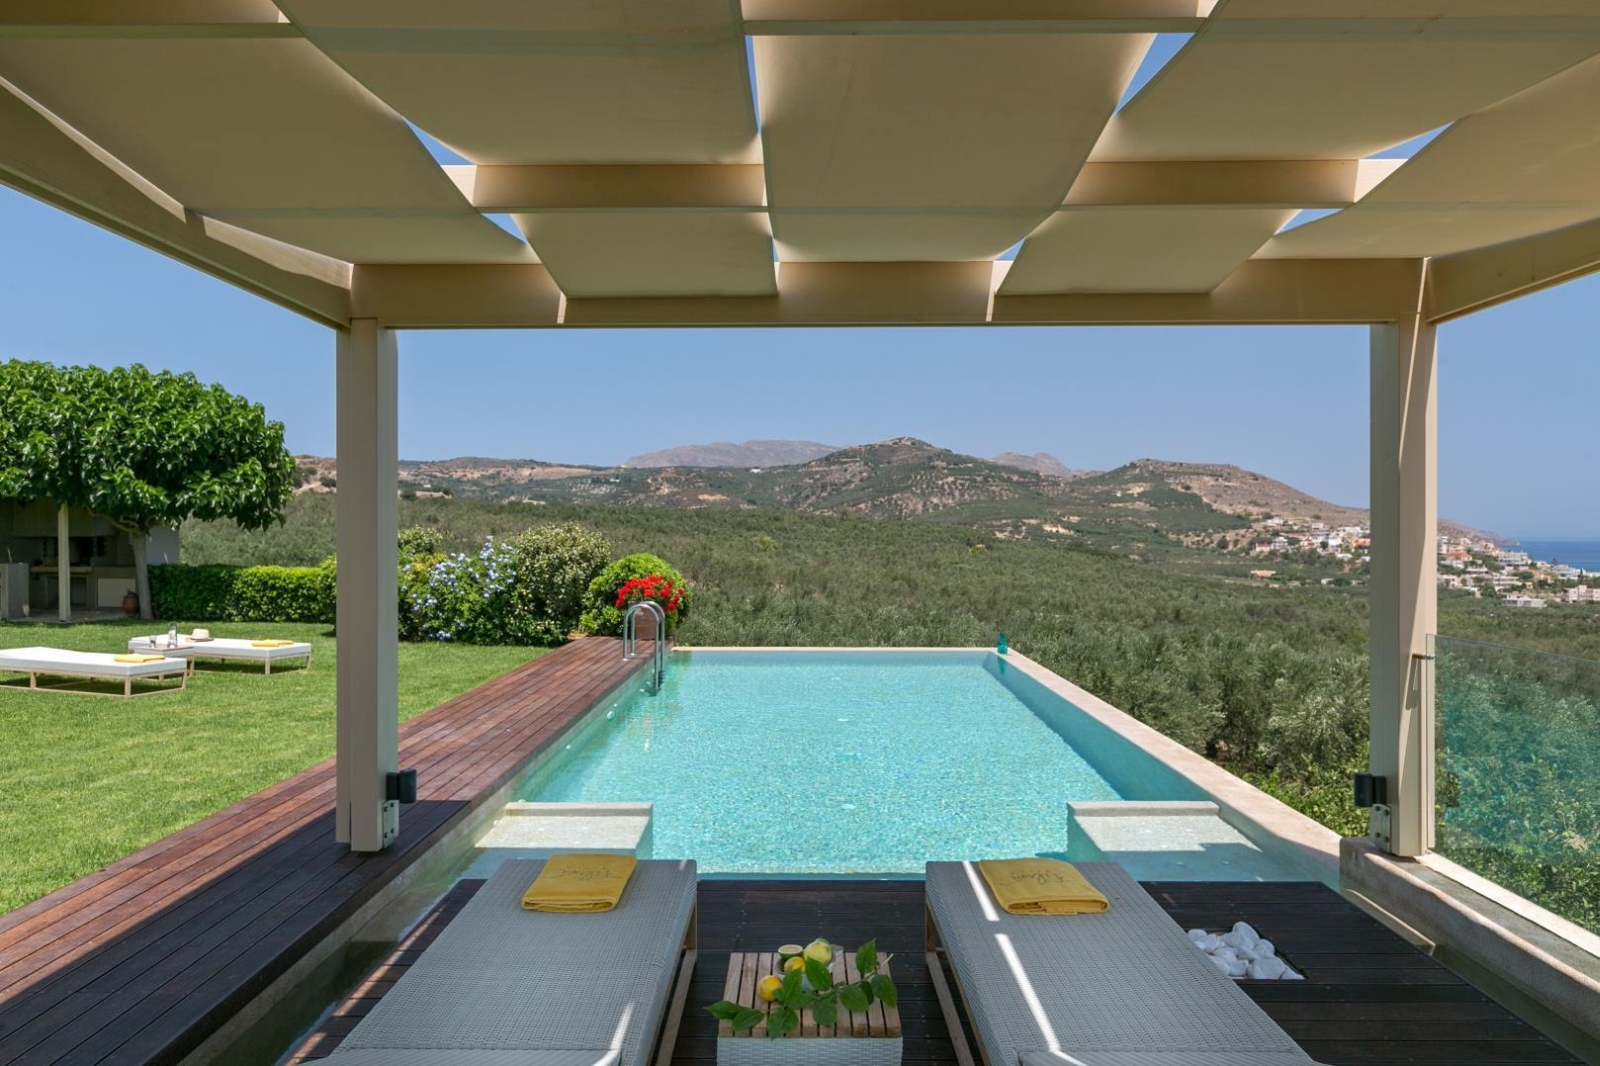 Sun loungers, towels, table and fruit in pergola with view of pool, garden and mountains at Villa Filira on Crete, Greece